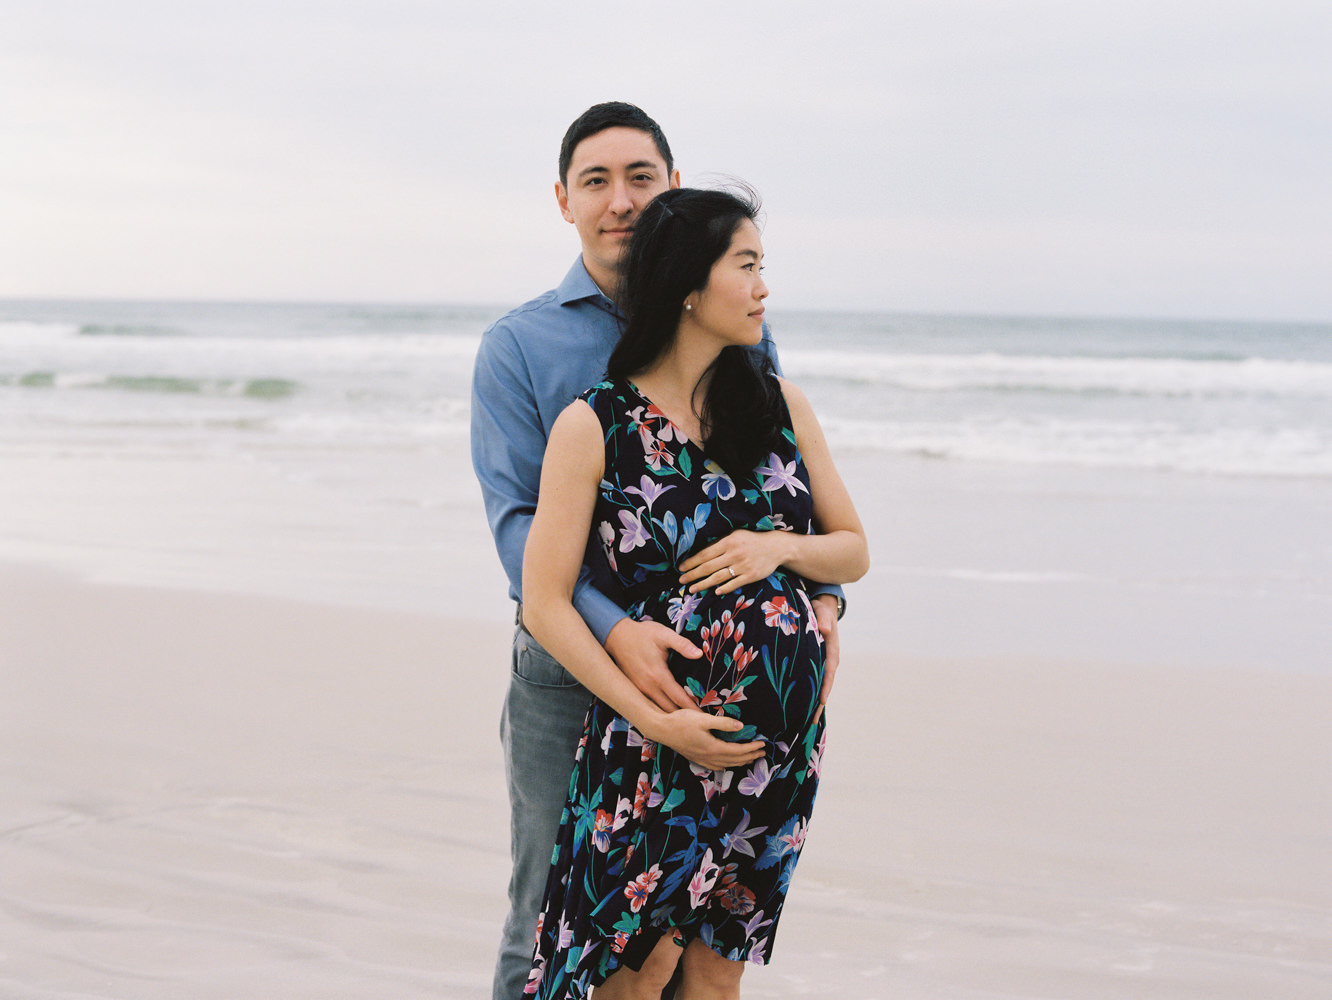 man hugging his pregnant wife from behind and looking calmly at camera while she looks to the side on the beach